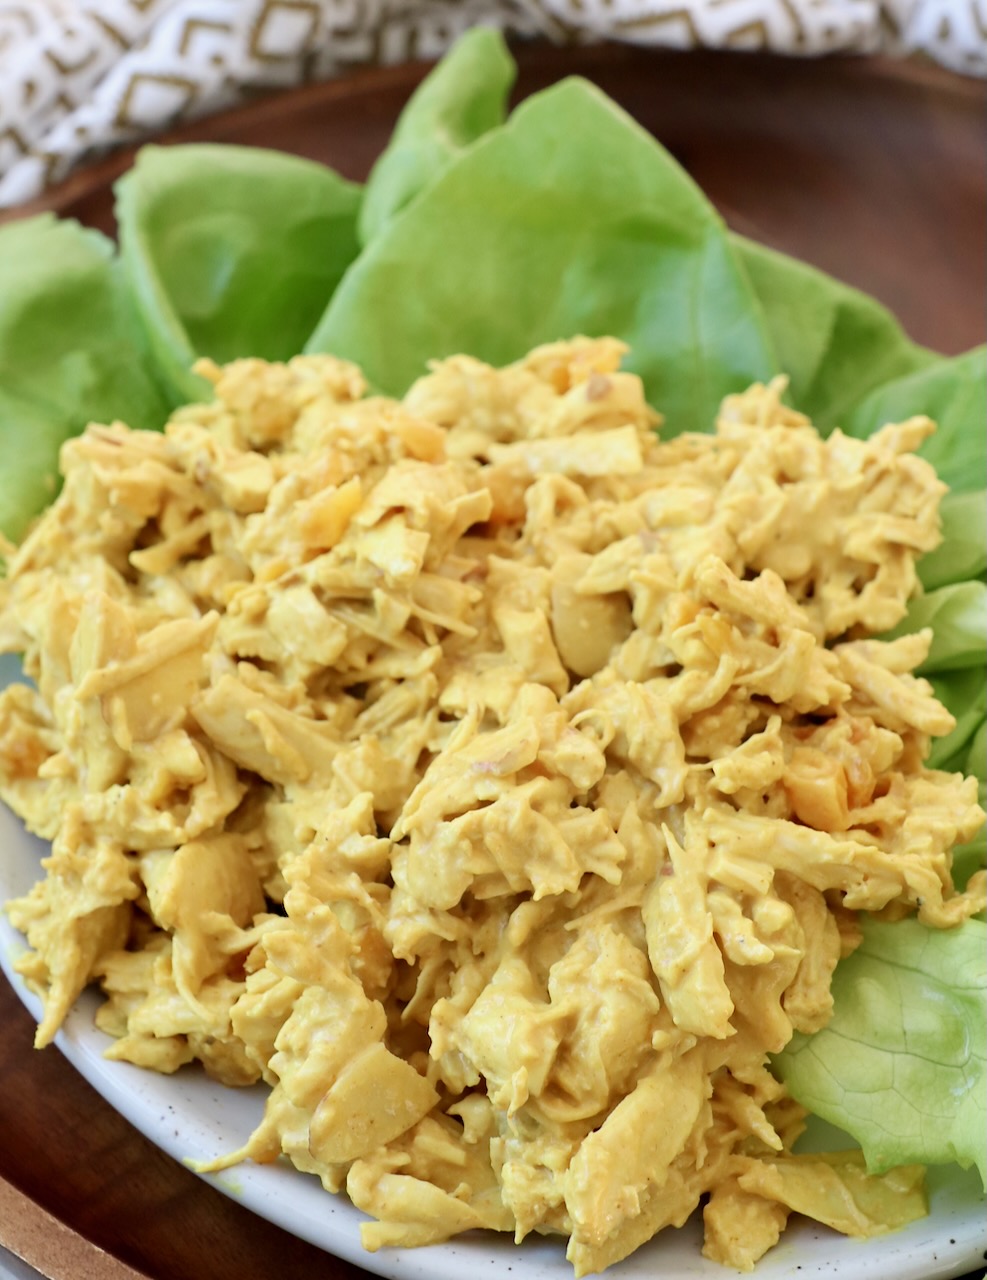 curry chicken salad on top of lettuce leaves on plate